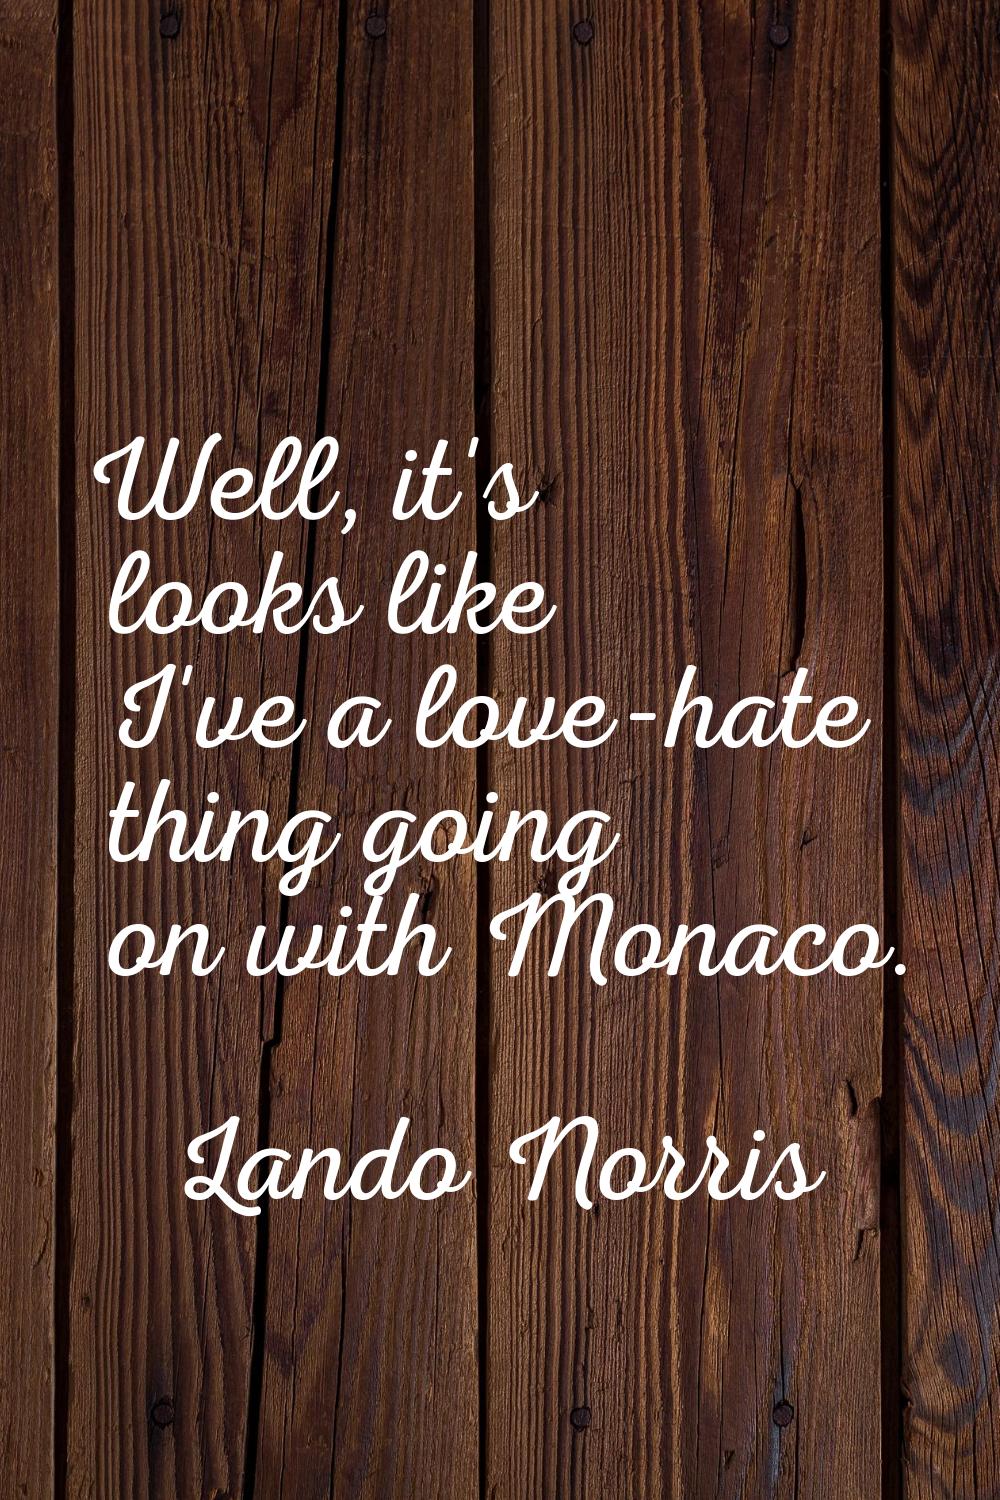 Well, it's looks like I've a love-hate thing going on with Monaco.